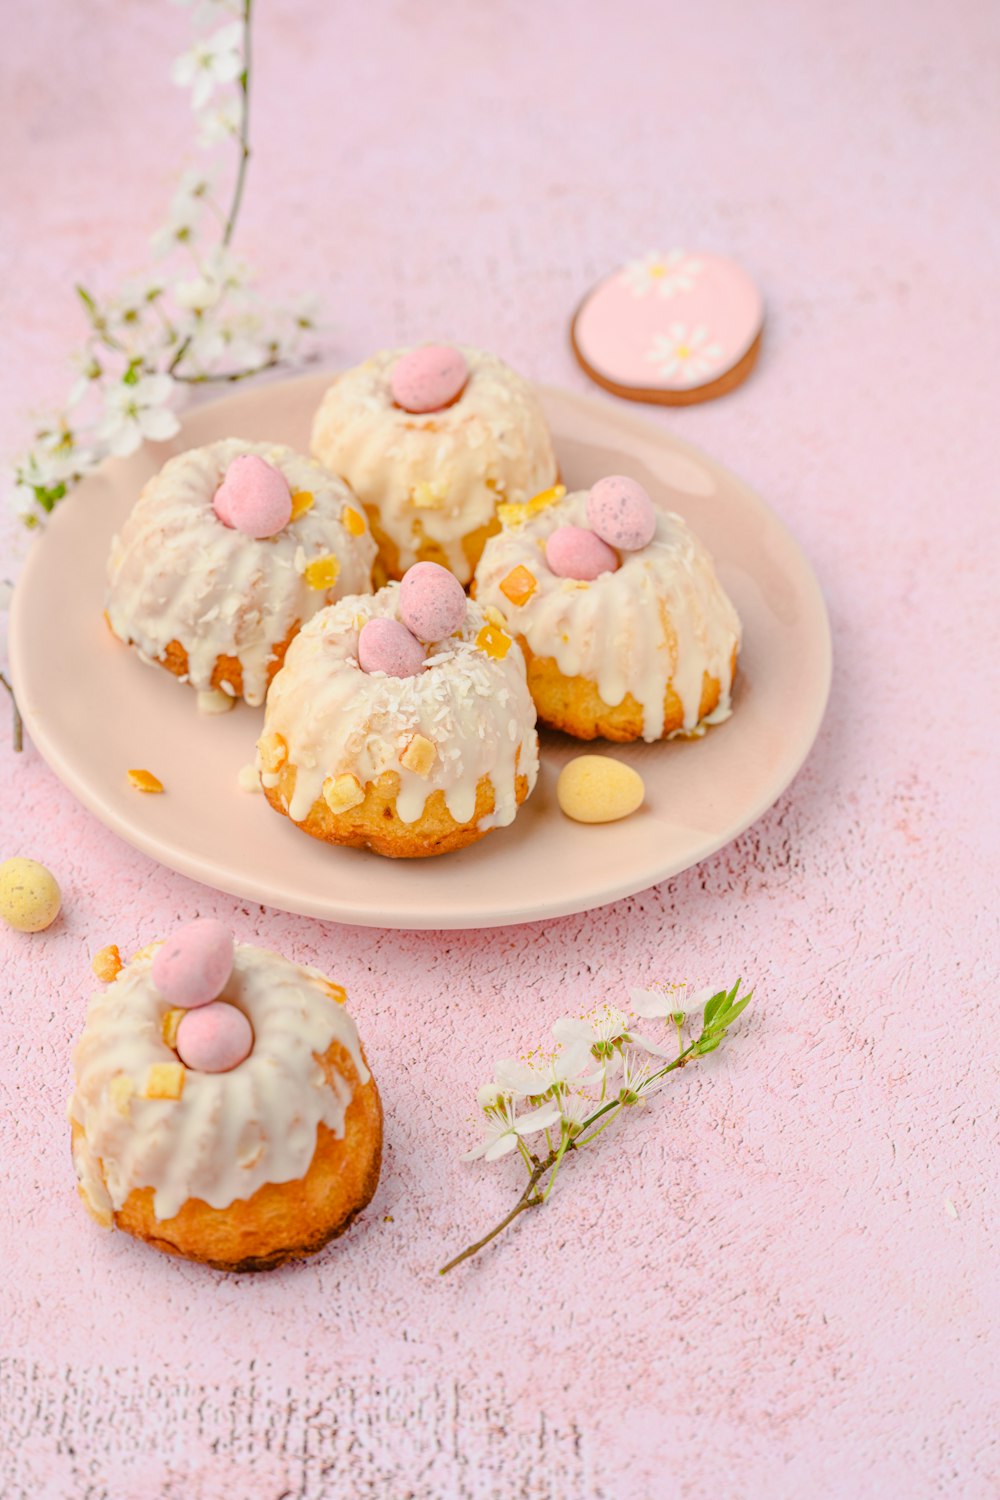 a plate of cookies with white frosting and pink candies